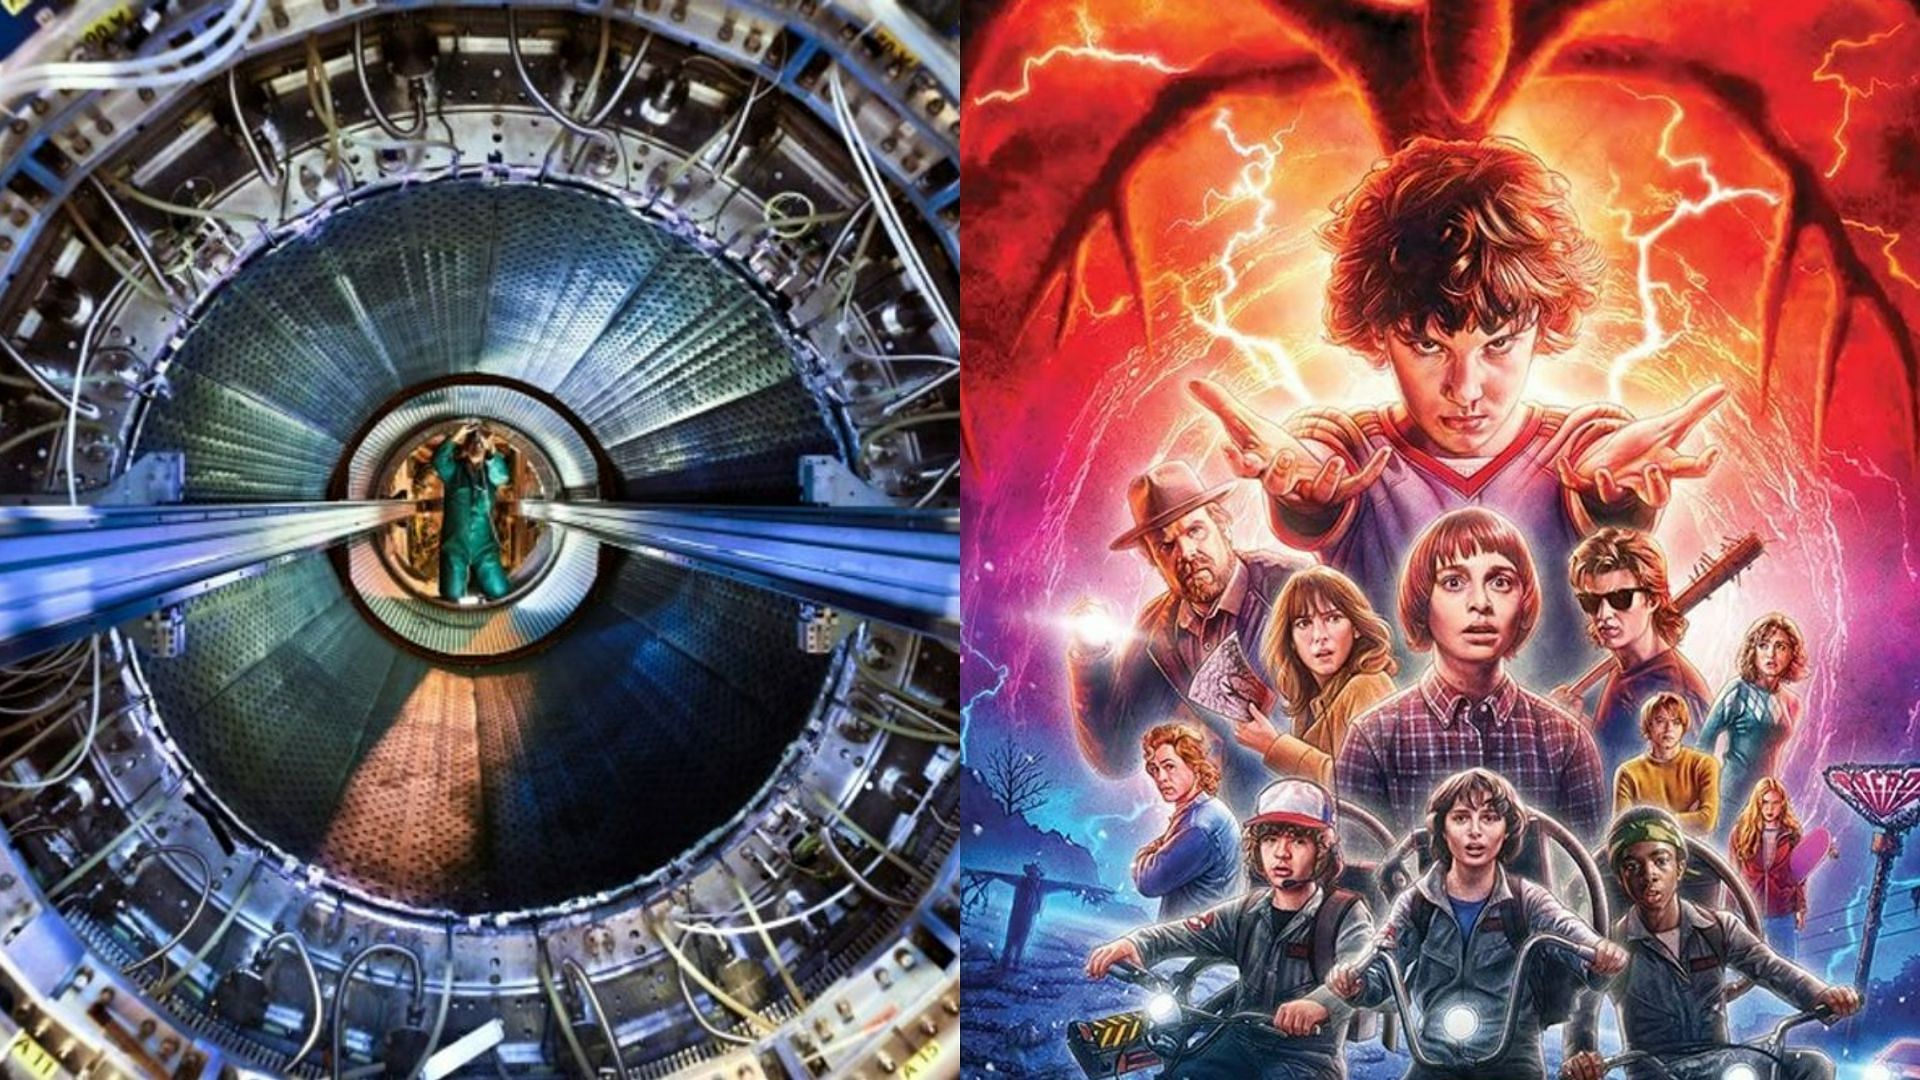 Netizens hilariously assume that CERN will be opening new portals similar to Stranger Things (Image via CERN and Netflix)